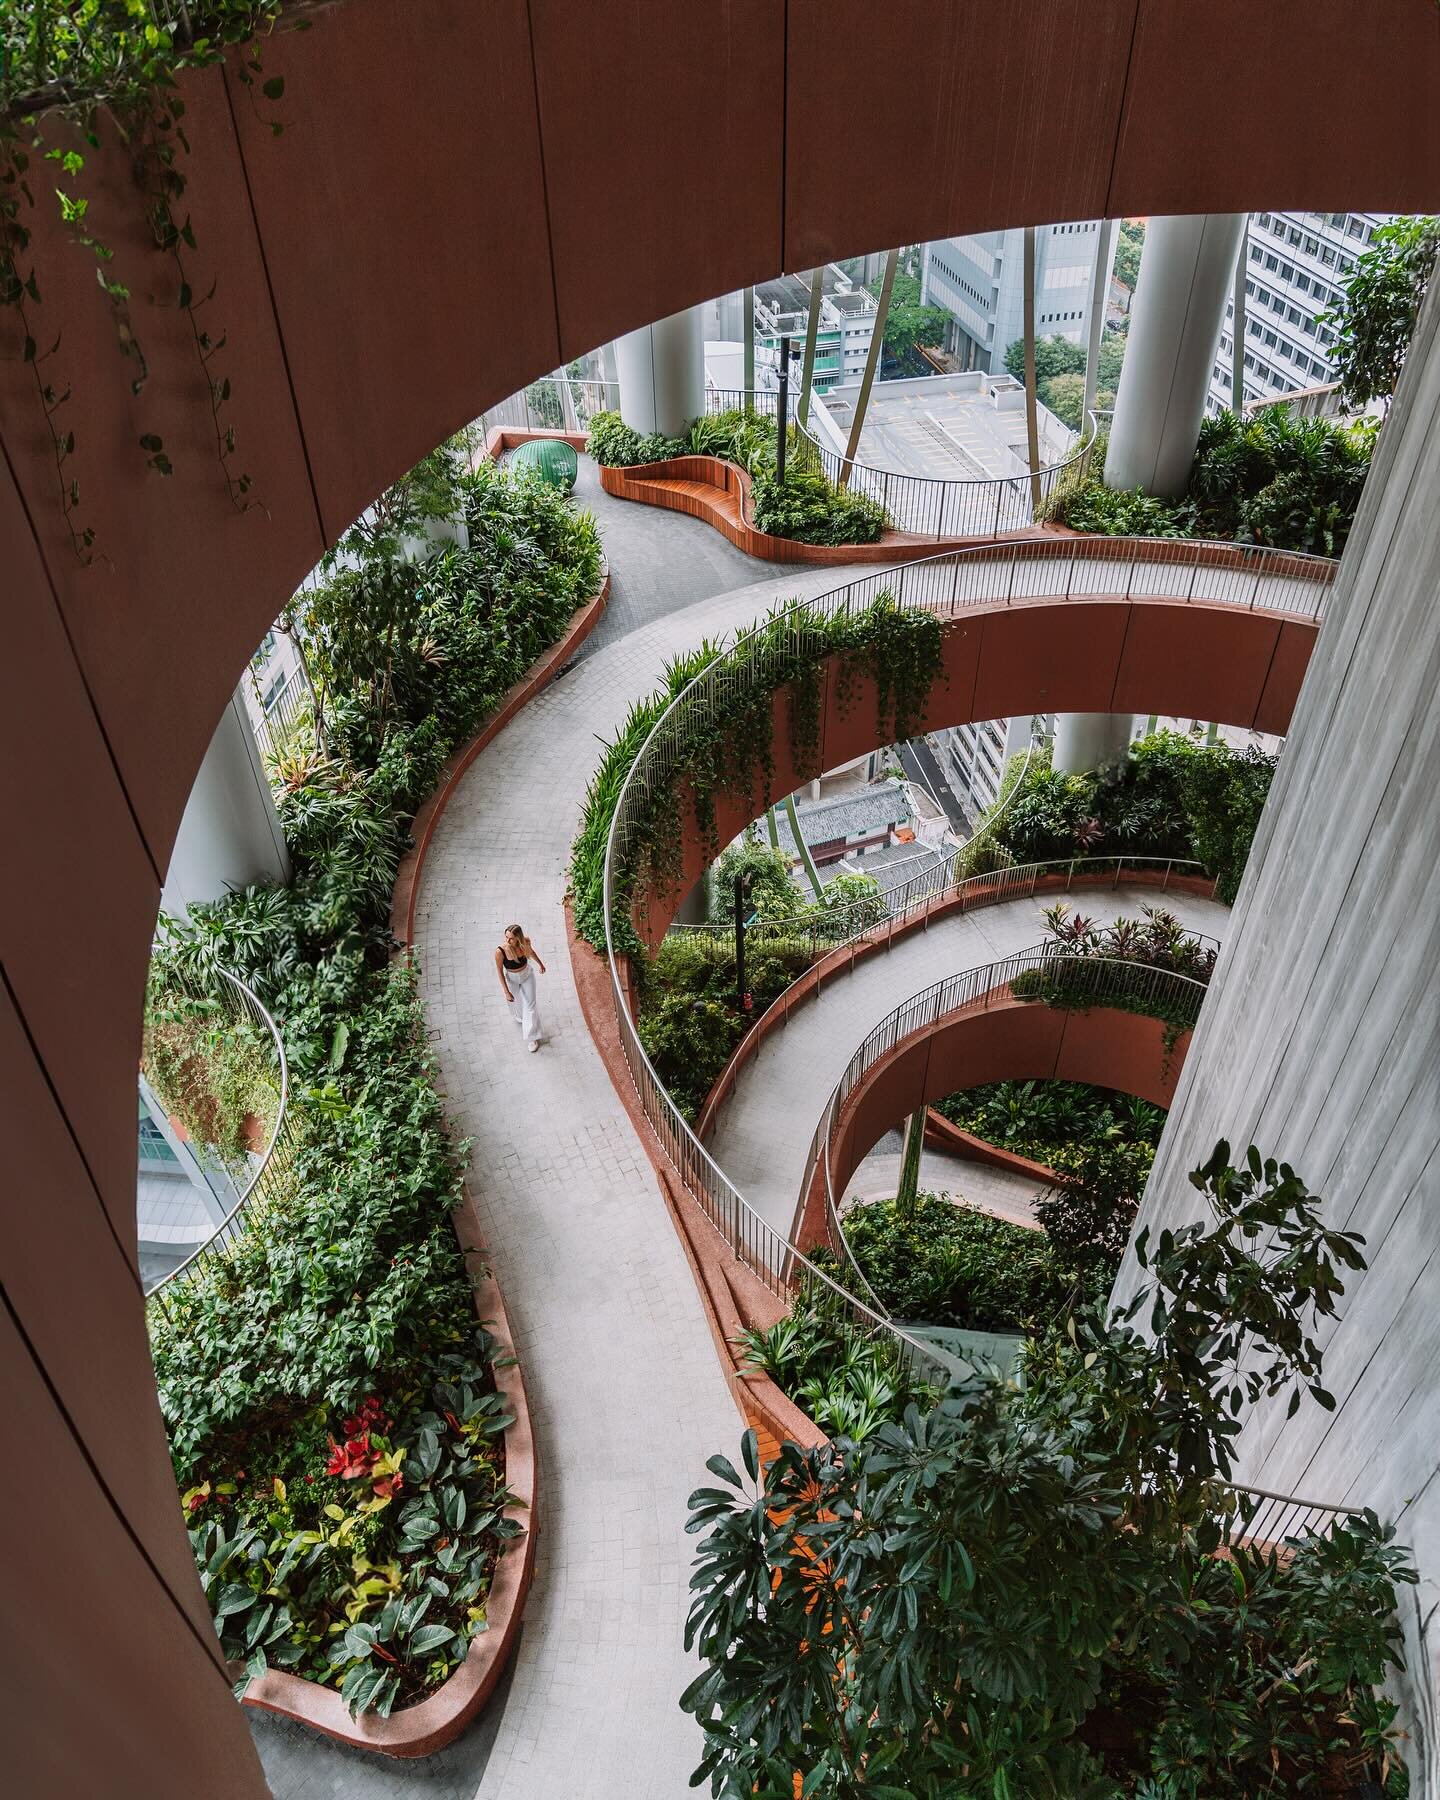 Swipe to see the photo vs video 👉🏼

🌿 The Green Oasis at CapitaSpring, a striking feature of Singapore&rsquo;s urban landscape, is an architectural masterpiece designed to bring nature into the heart of the city. No wonder Singapore is considered 